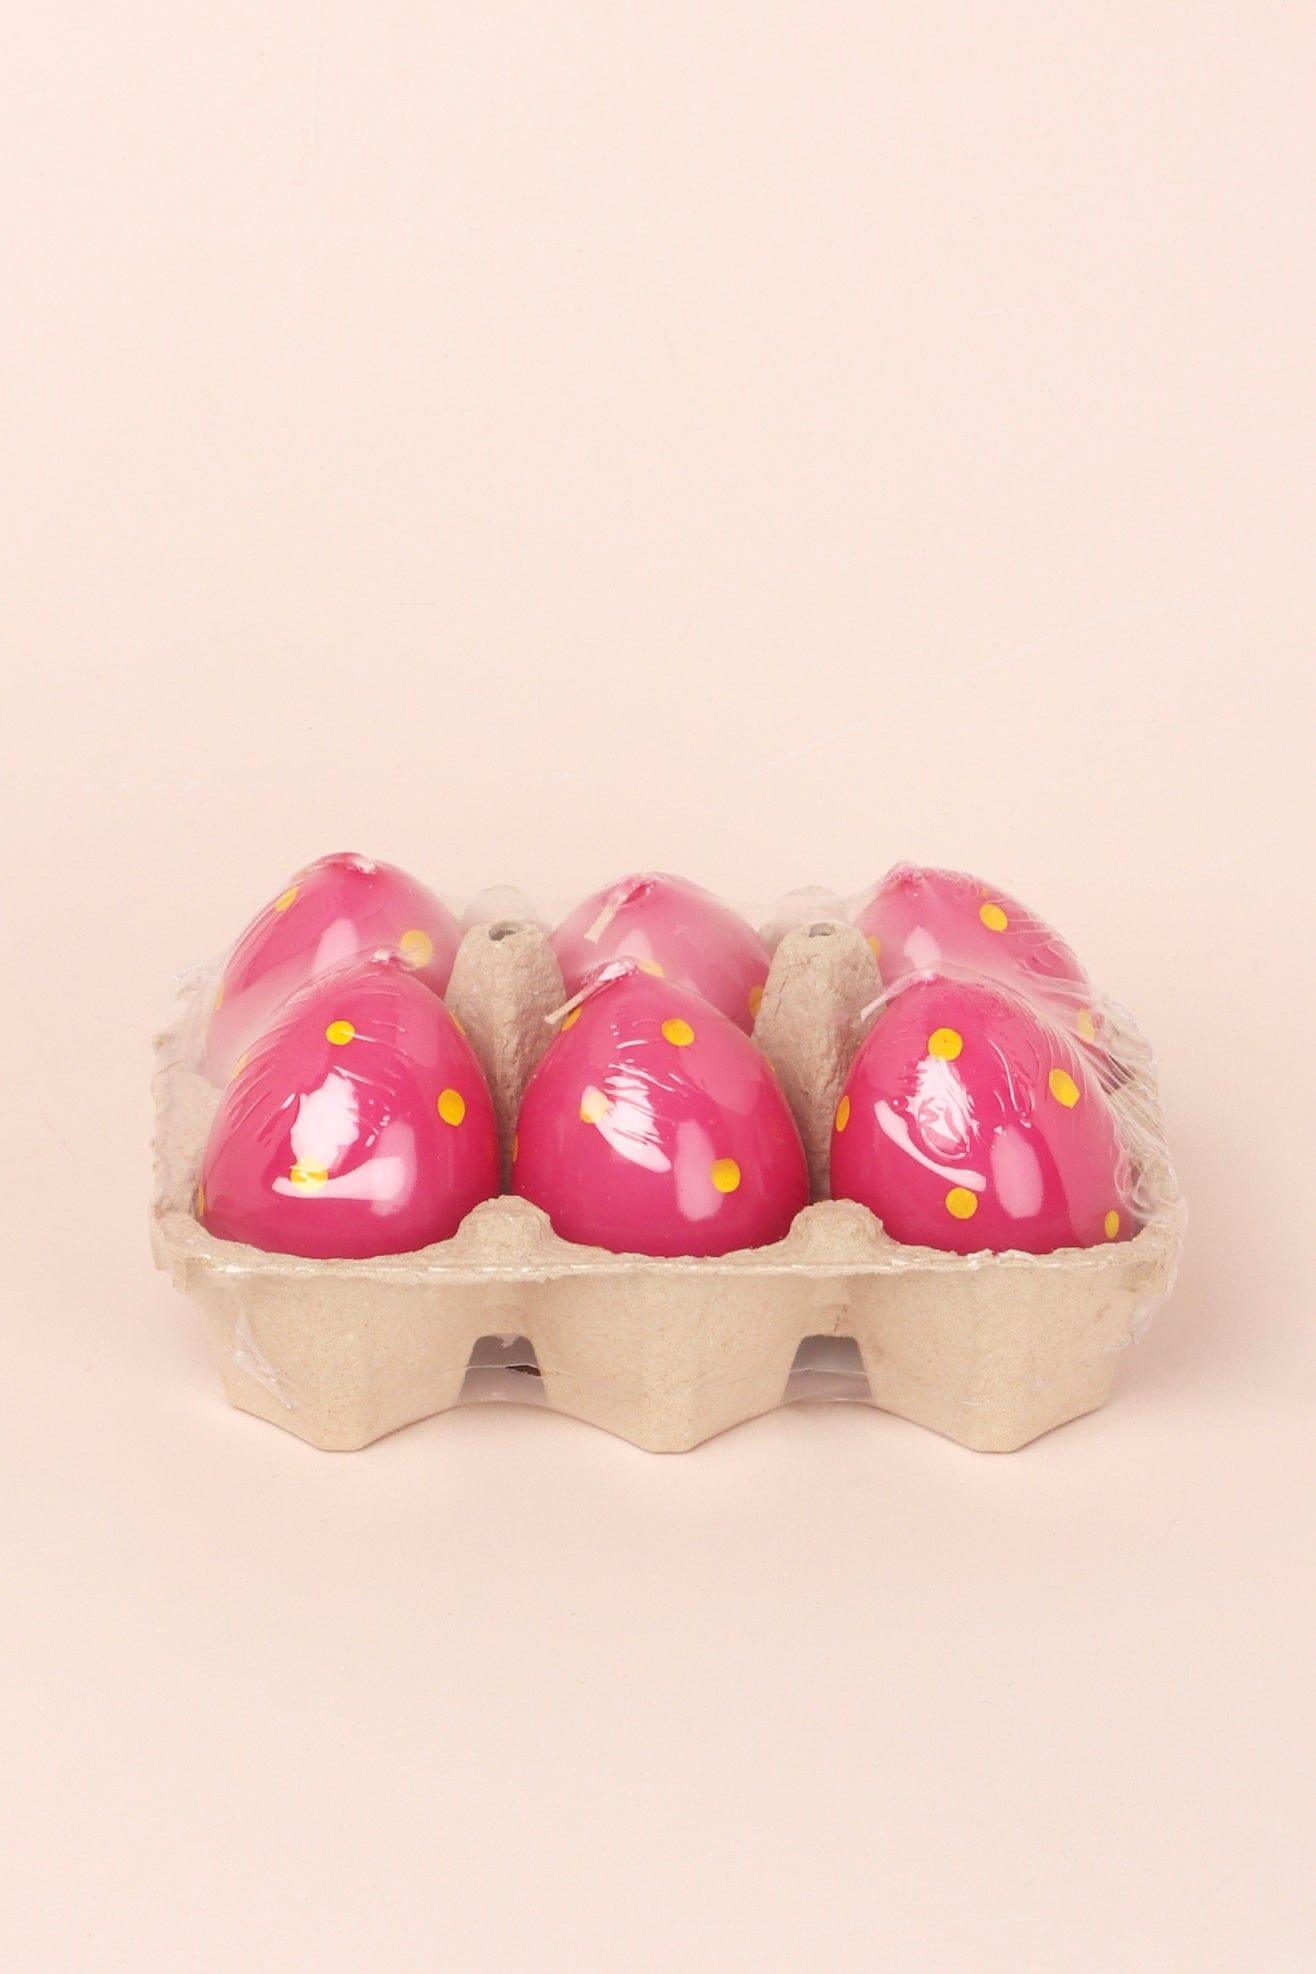 G Decor Candles Pink Set of 6 Easter Egg Candles - Pink